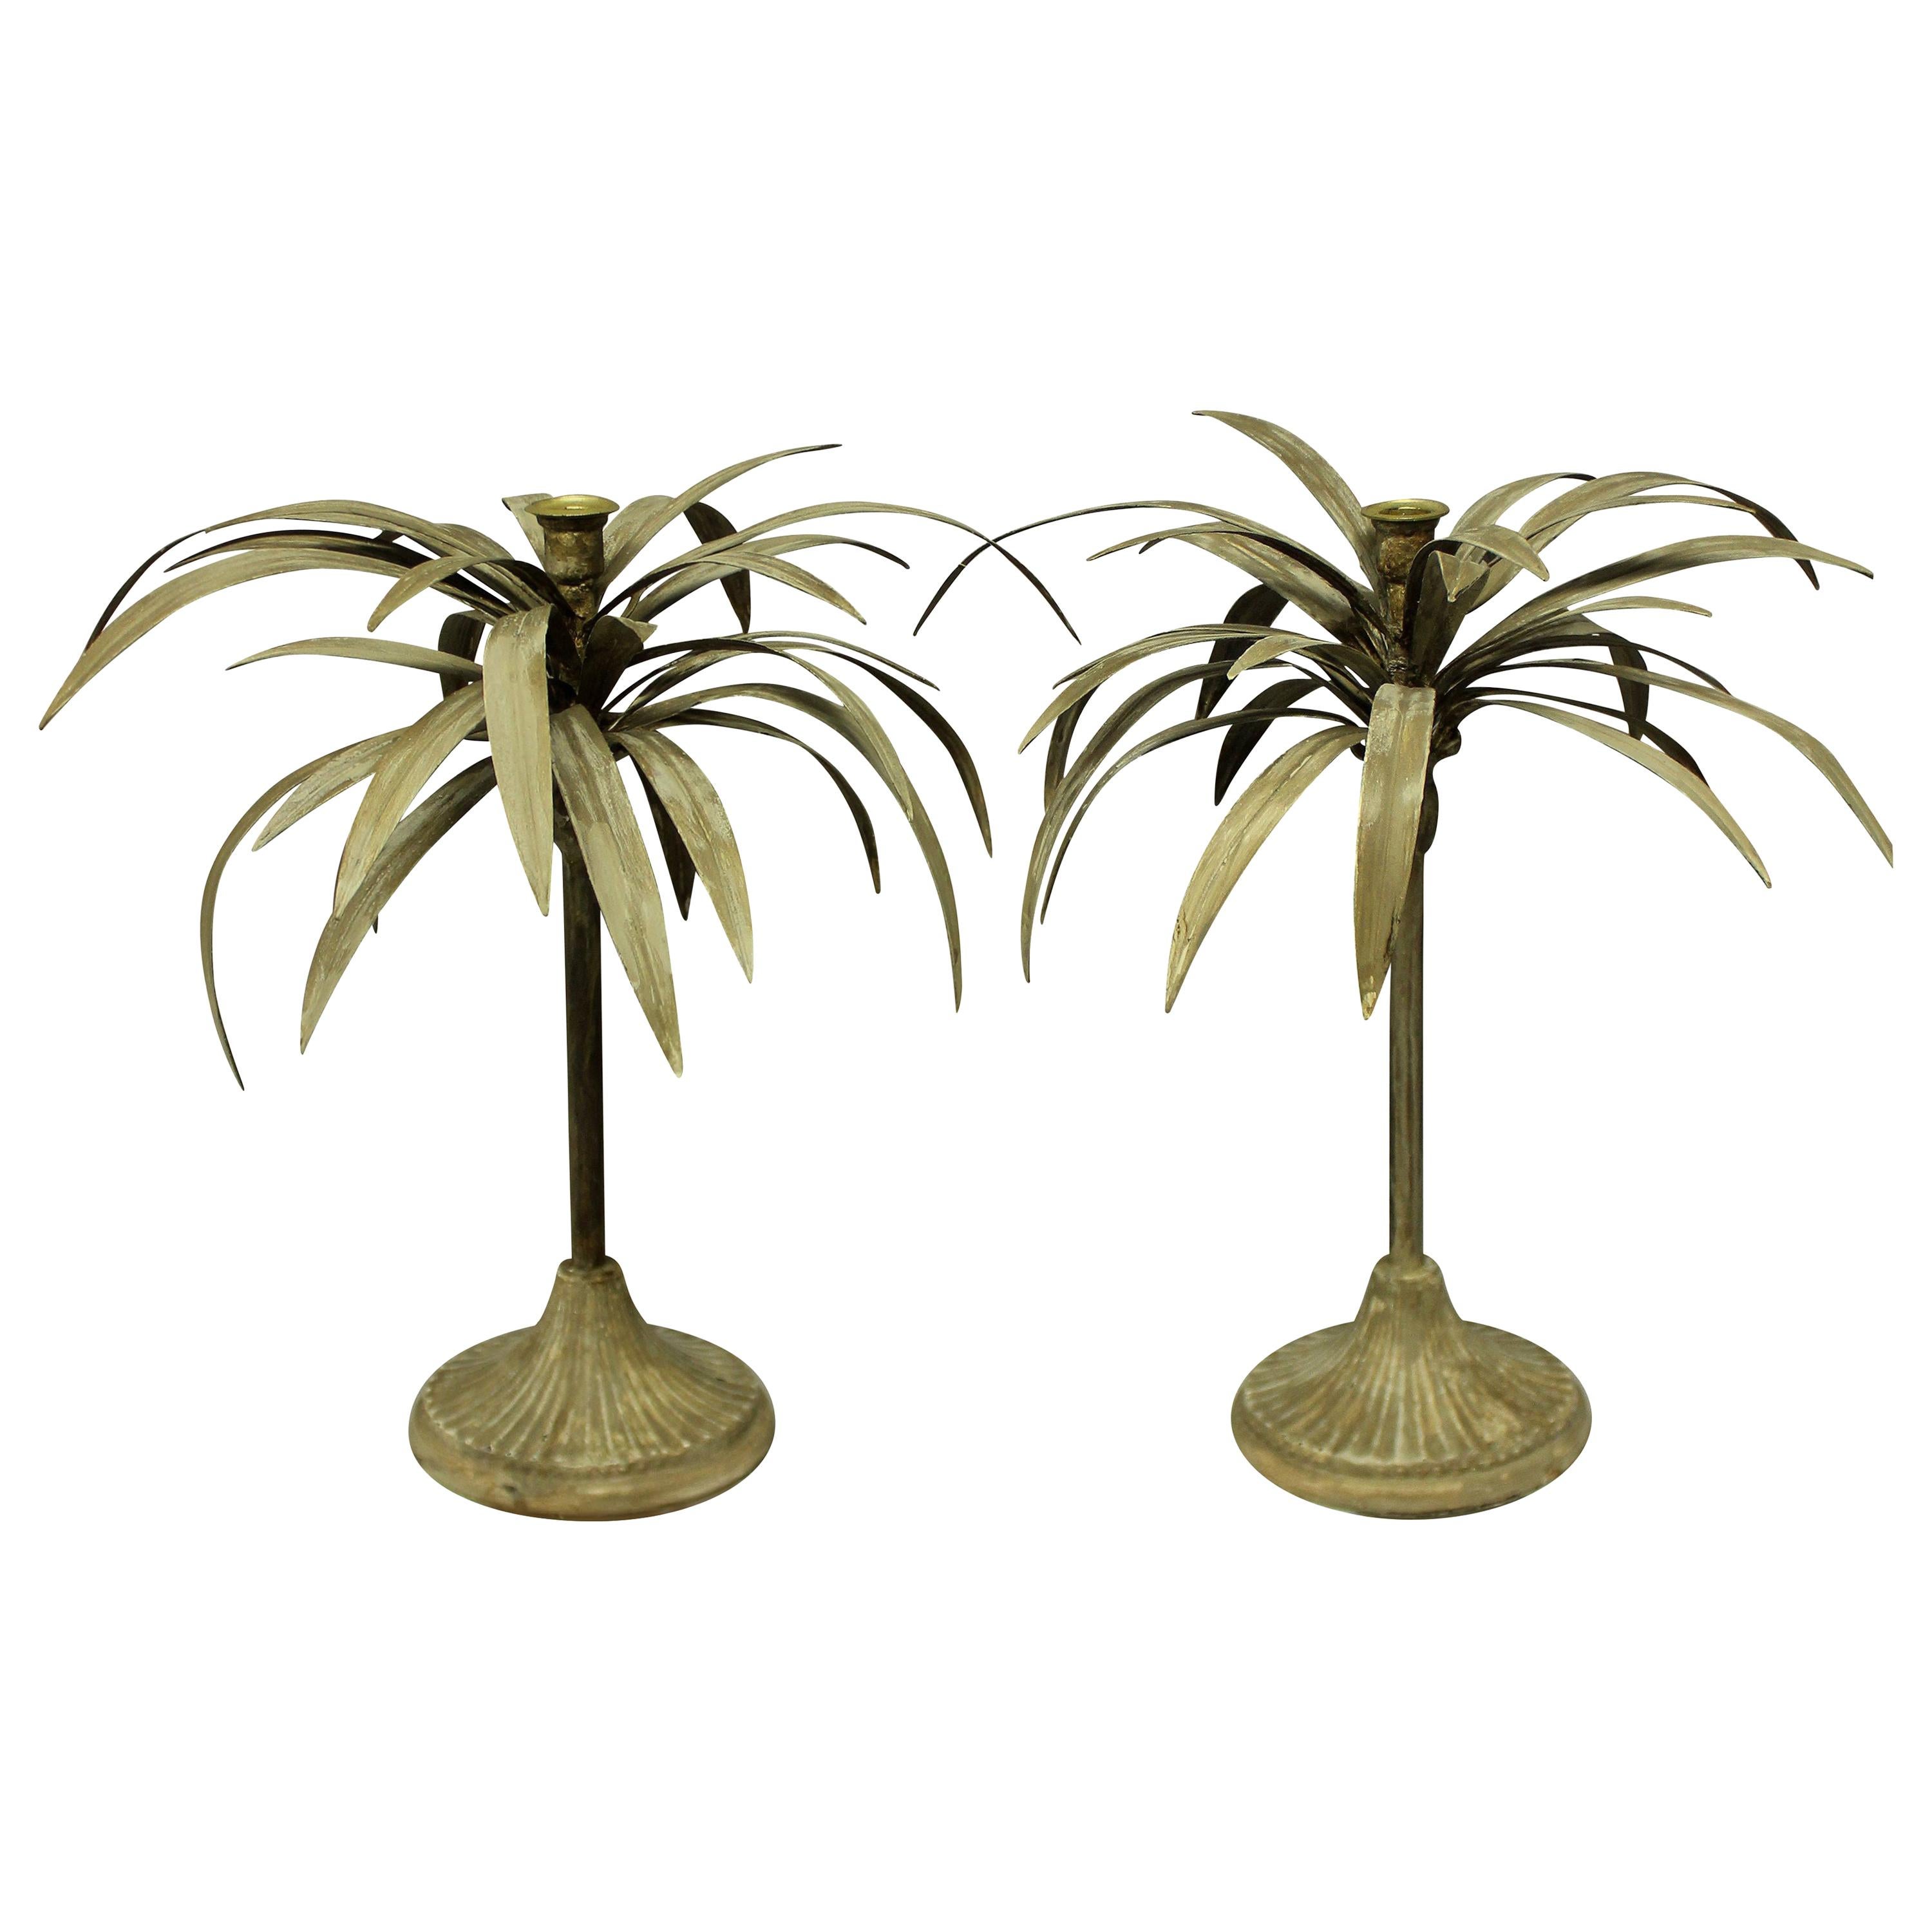 Pair of Toleware Palm Tree Candlesticks